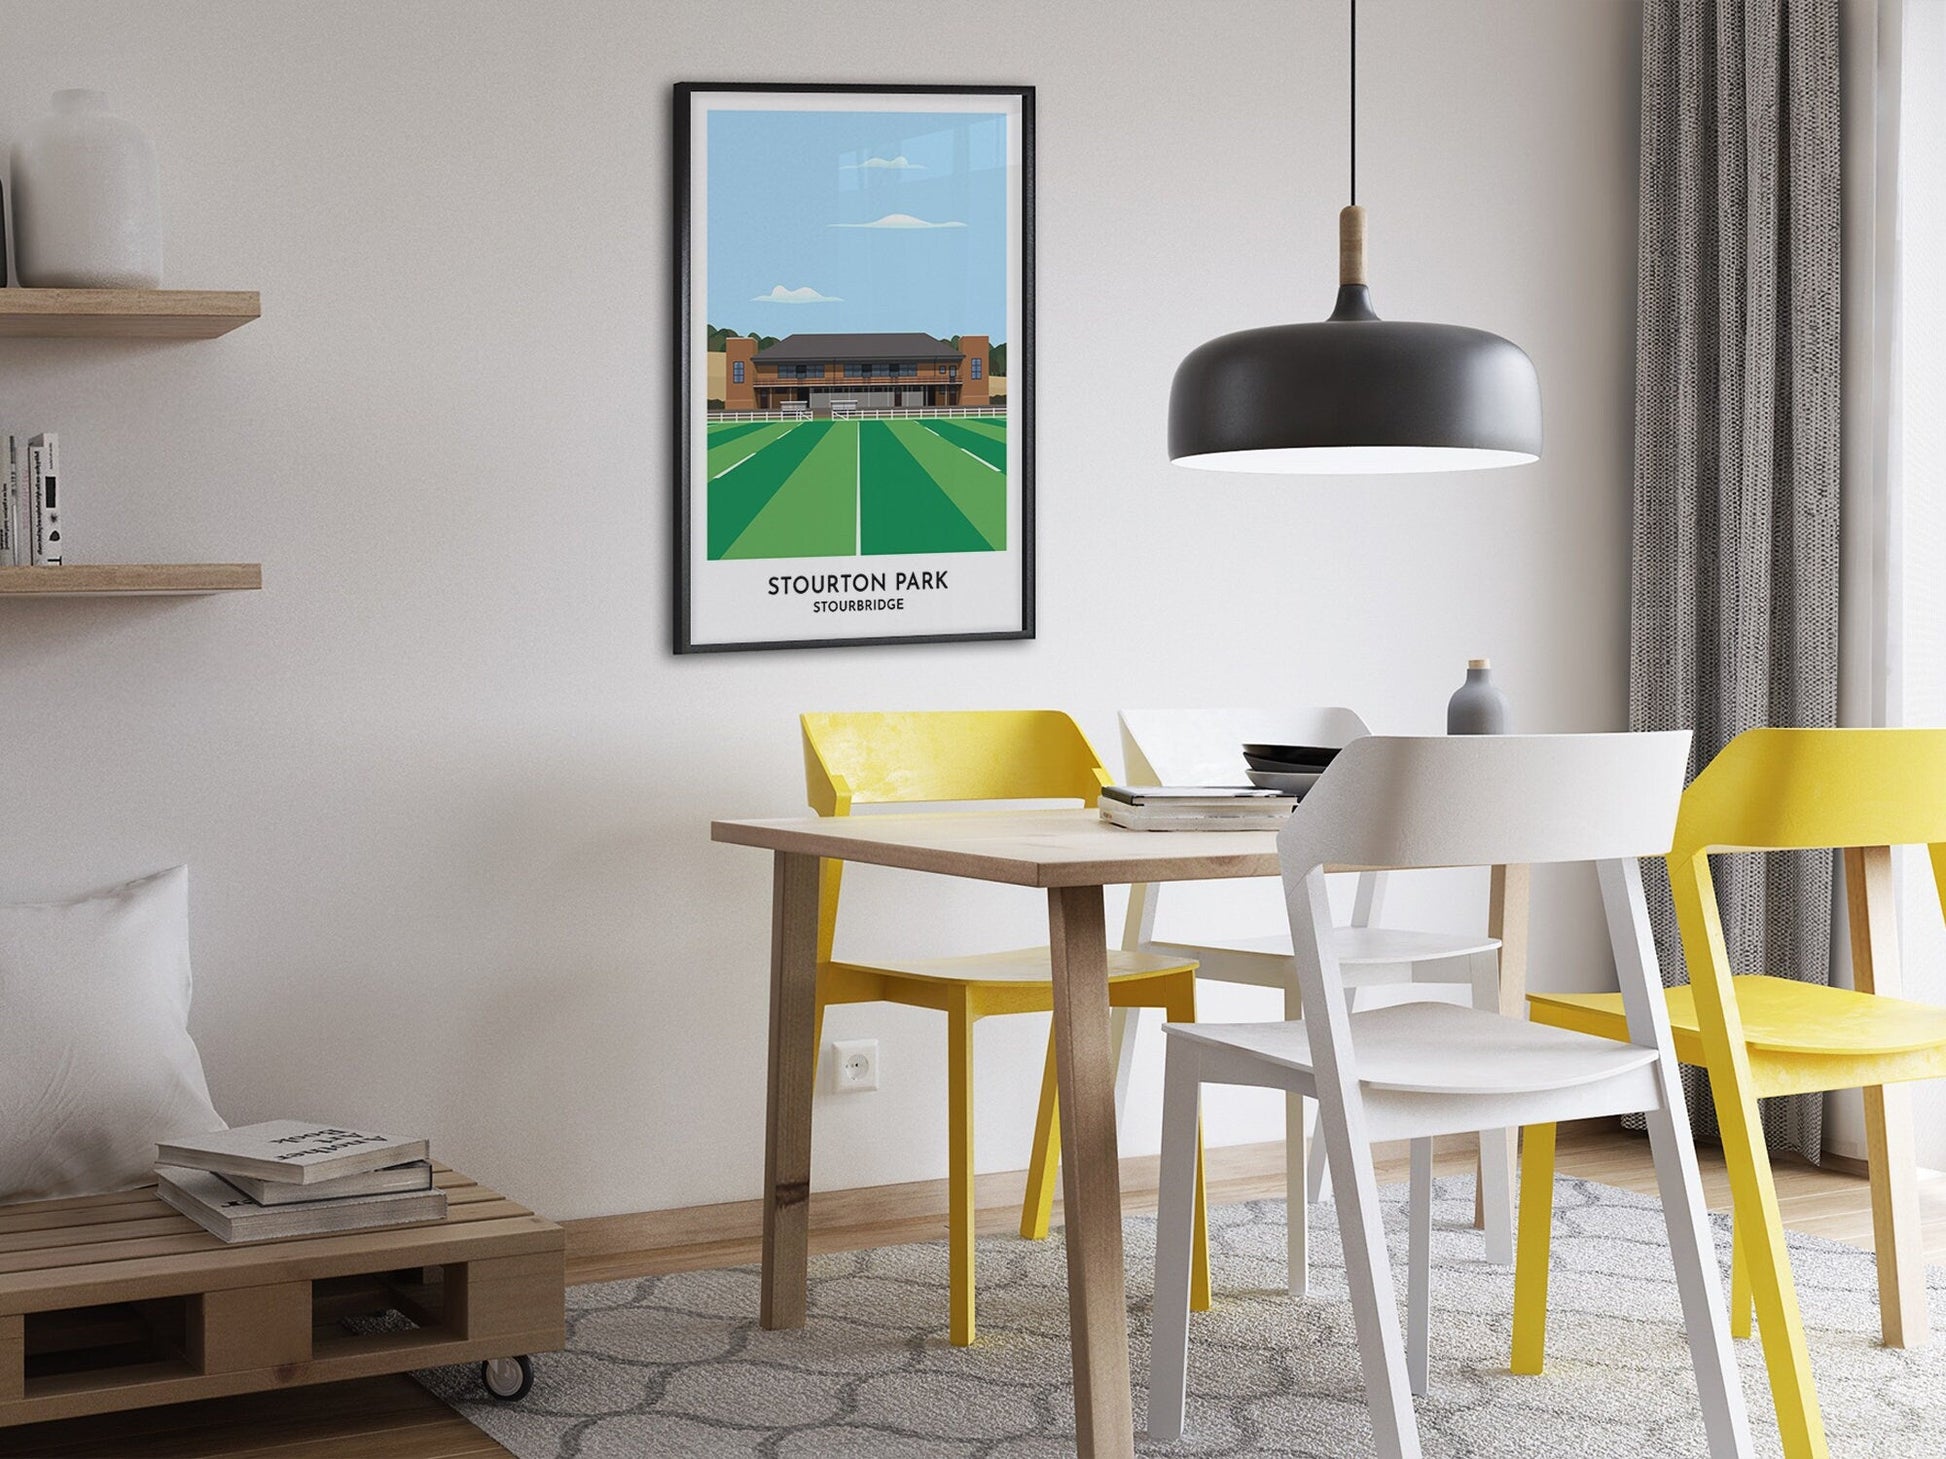 Stourbridge Rugby - Stourton Park Rugby Ground Art - West Midlands Gift Poster - Gift for Men Women Rugby Fans - Turf Football Art